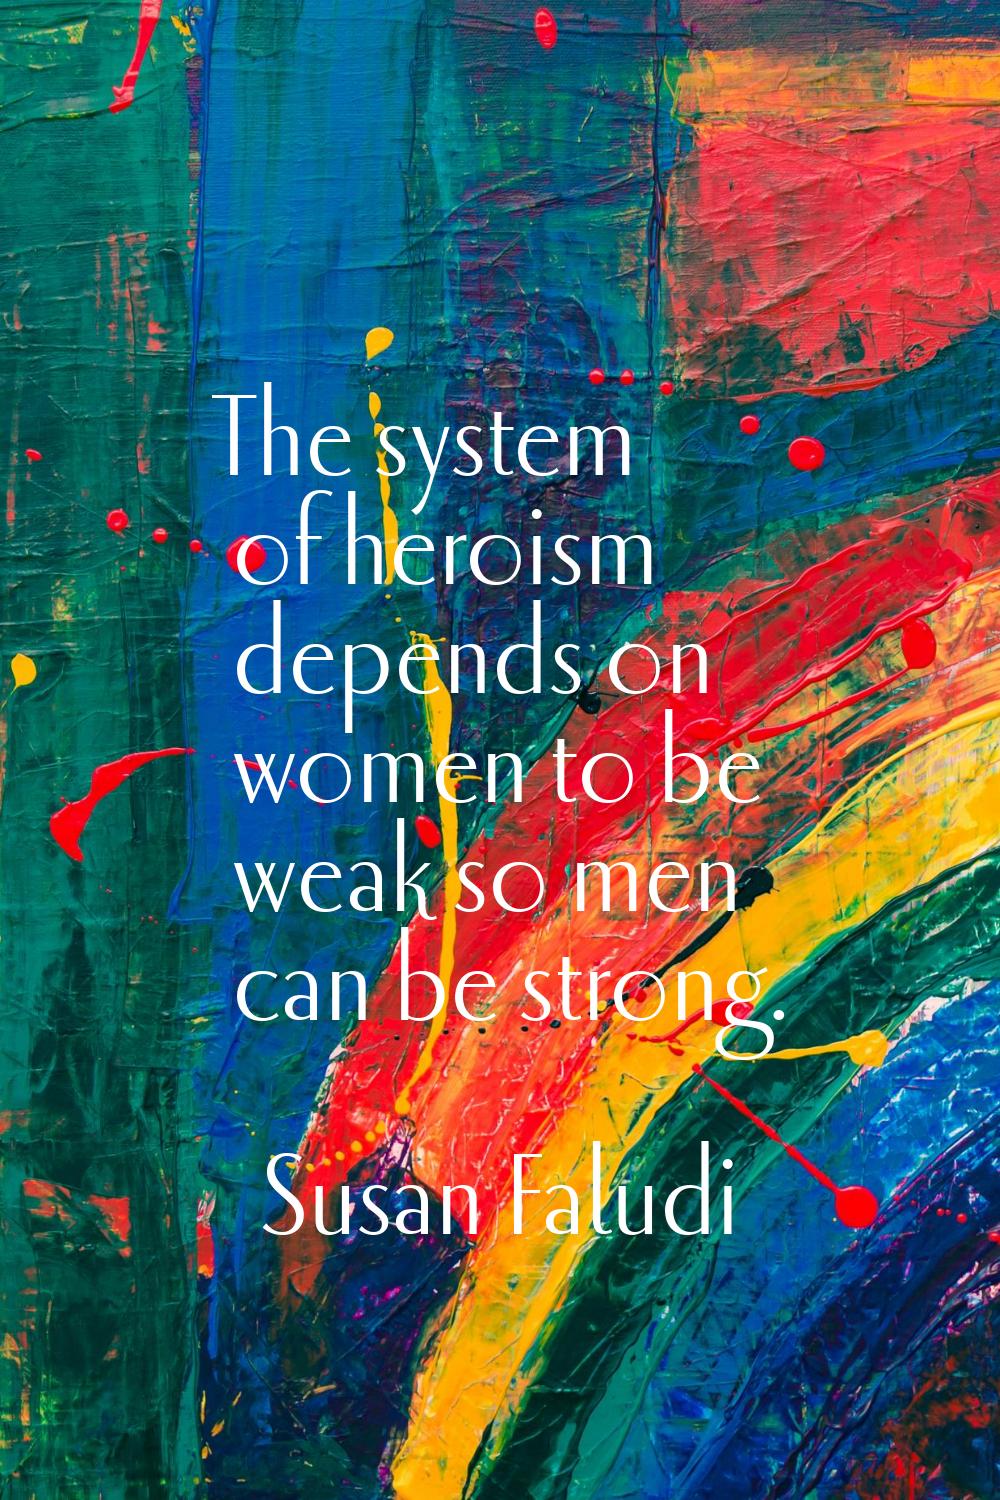 The system of heroism depends on women to be weak so men can be strong.